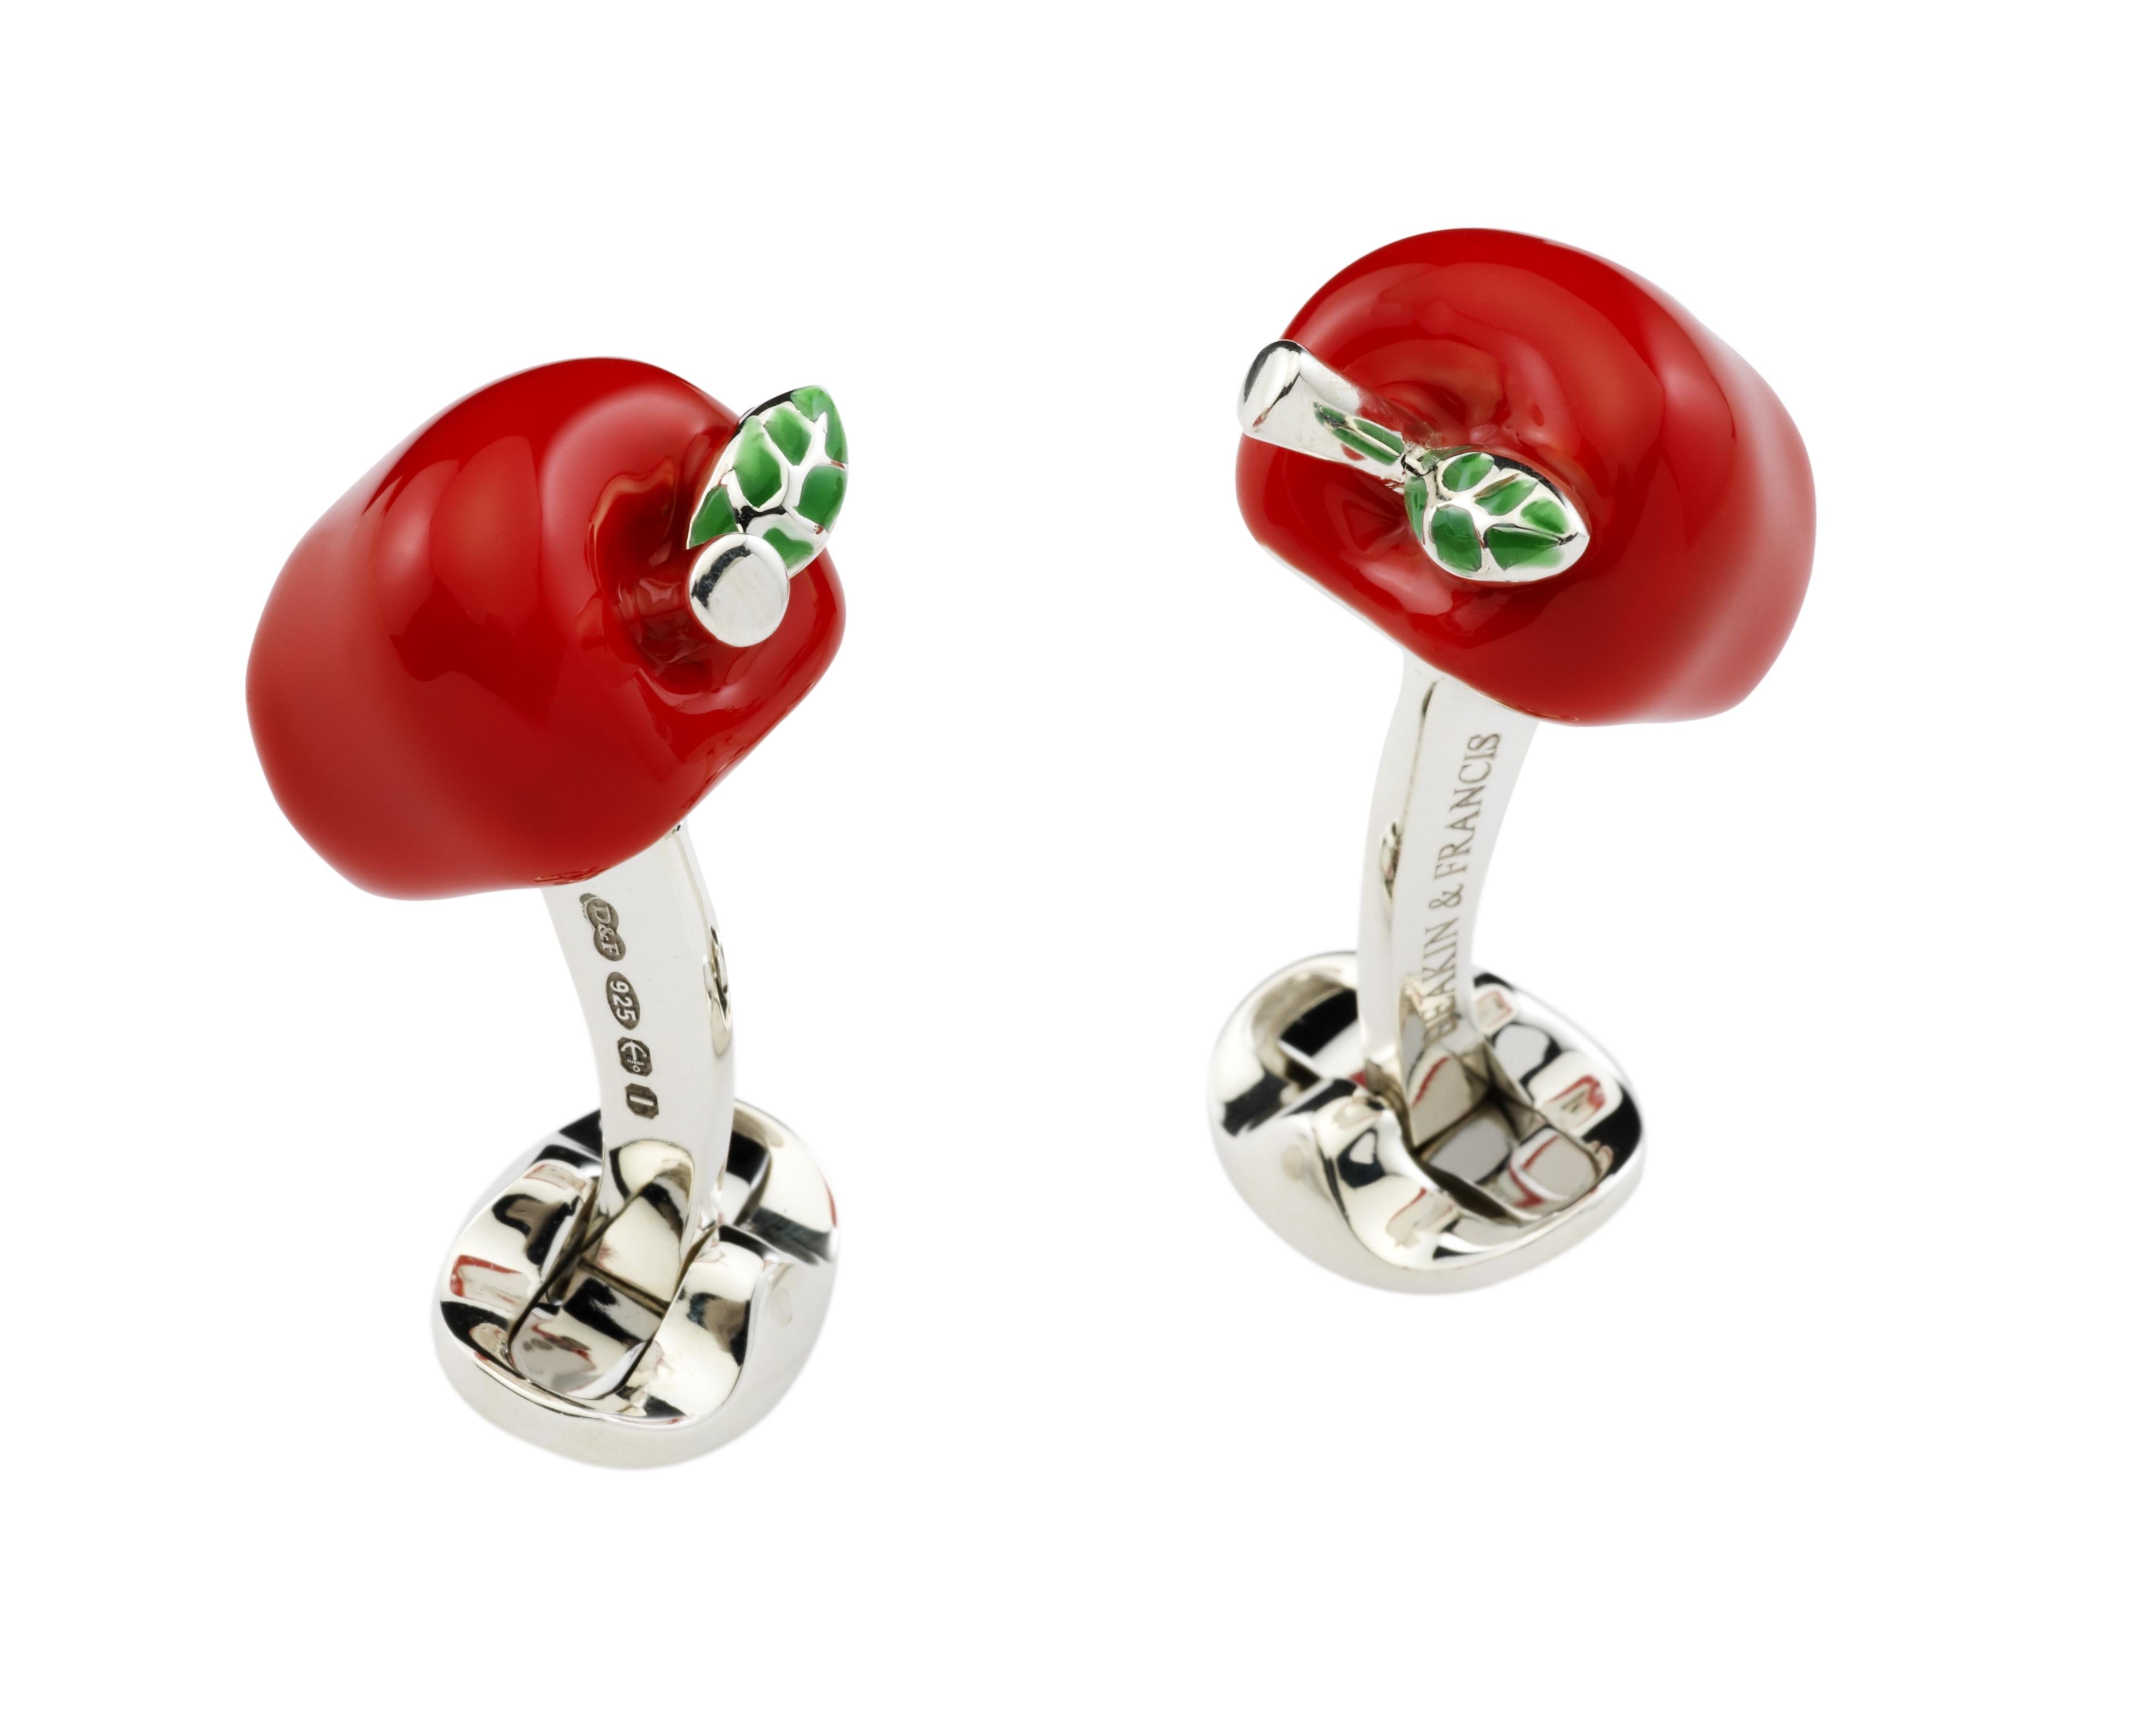 DEAKIN & FRANCIS, Piccadilly Arcade, London

Sweet and delicious - these beautiful apple cufflinks will certainly be the apple of your eye! Made from sterling silver and hand-enamelled in a juicy red finish, these unique apple themed cufflinks will